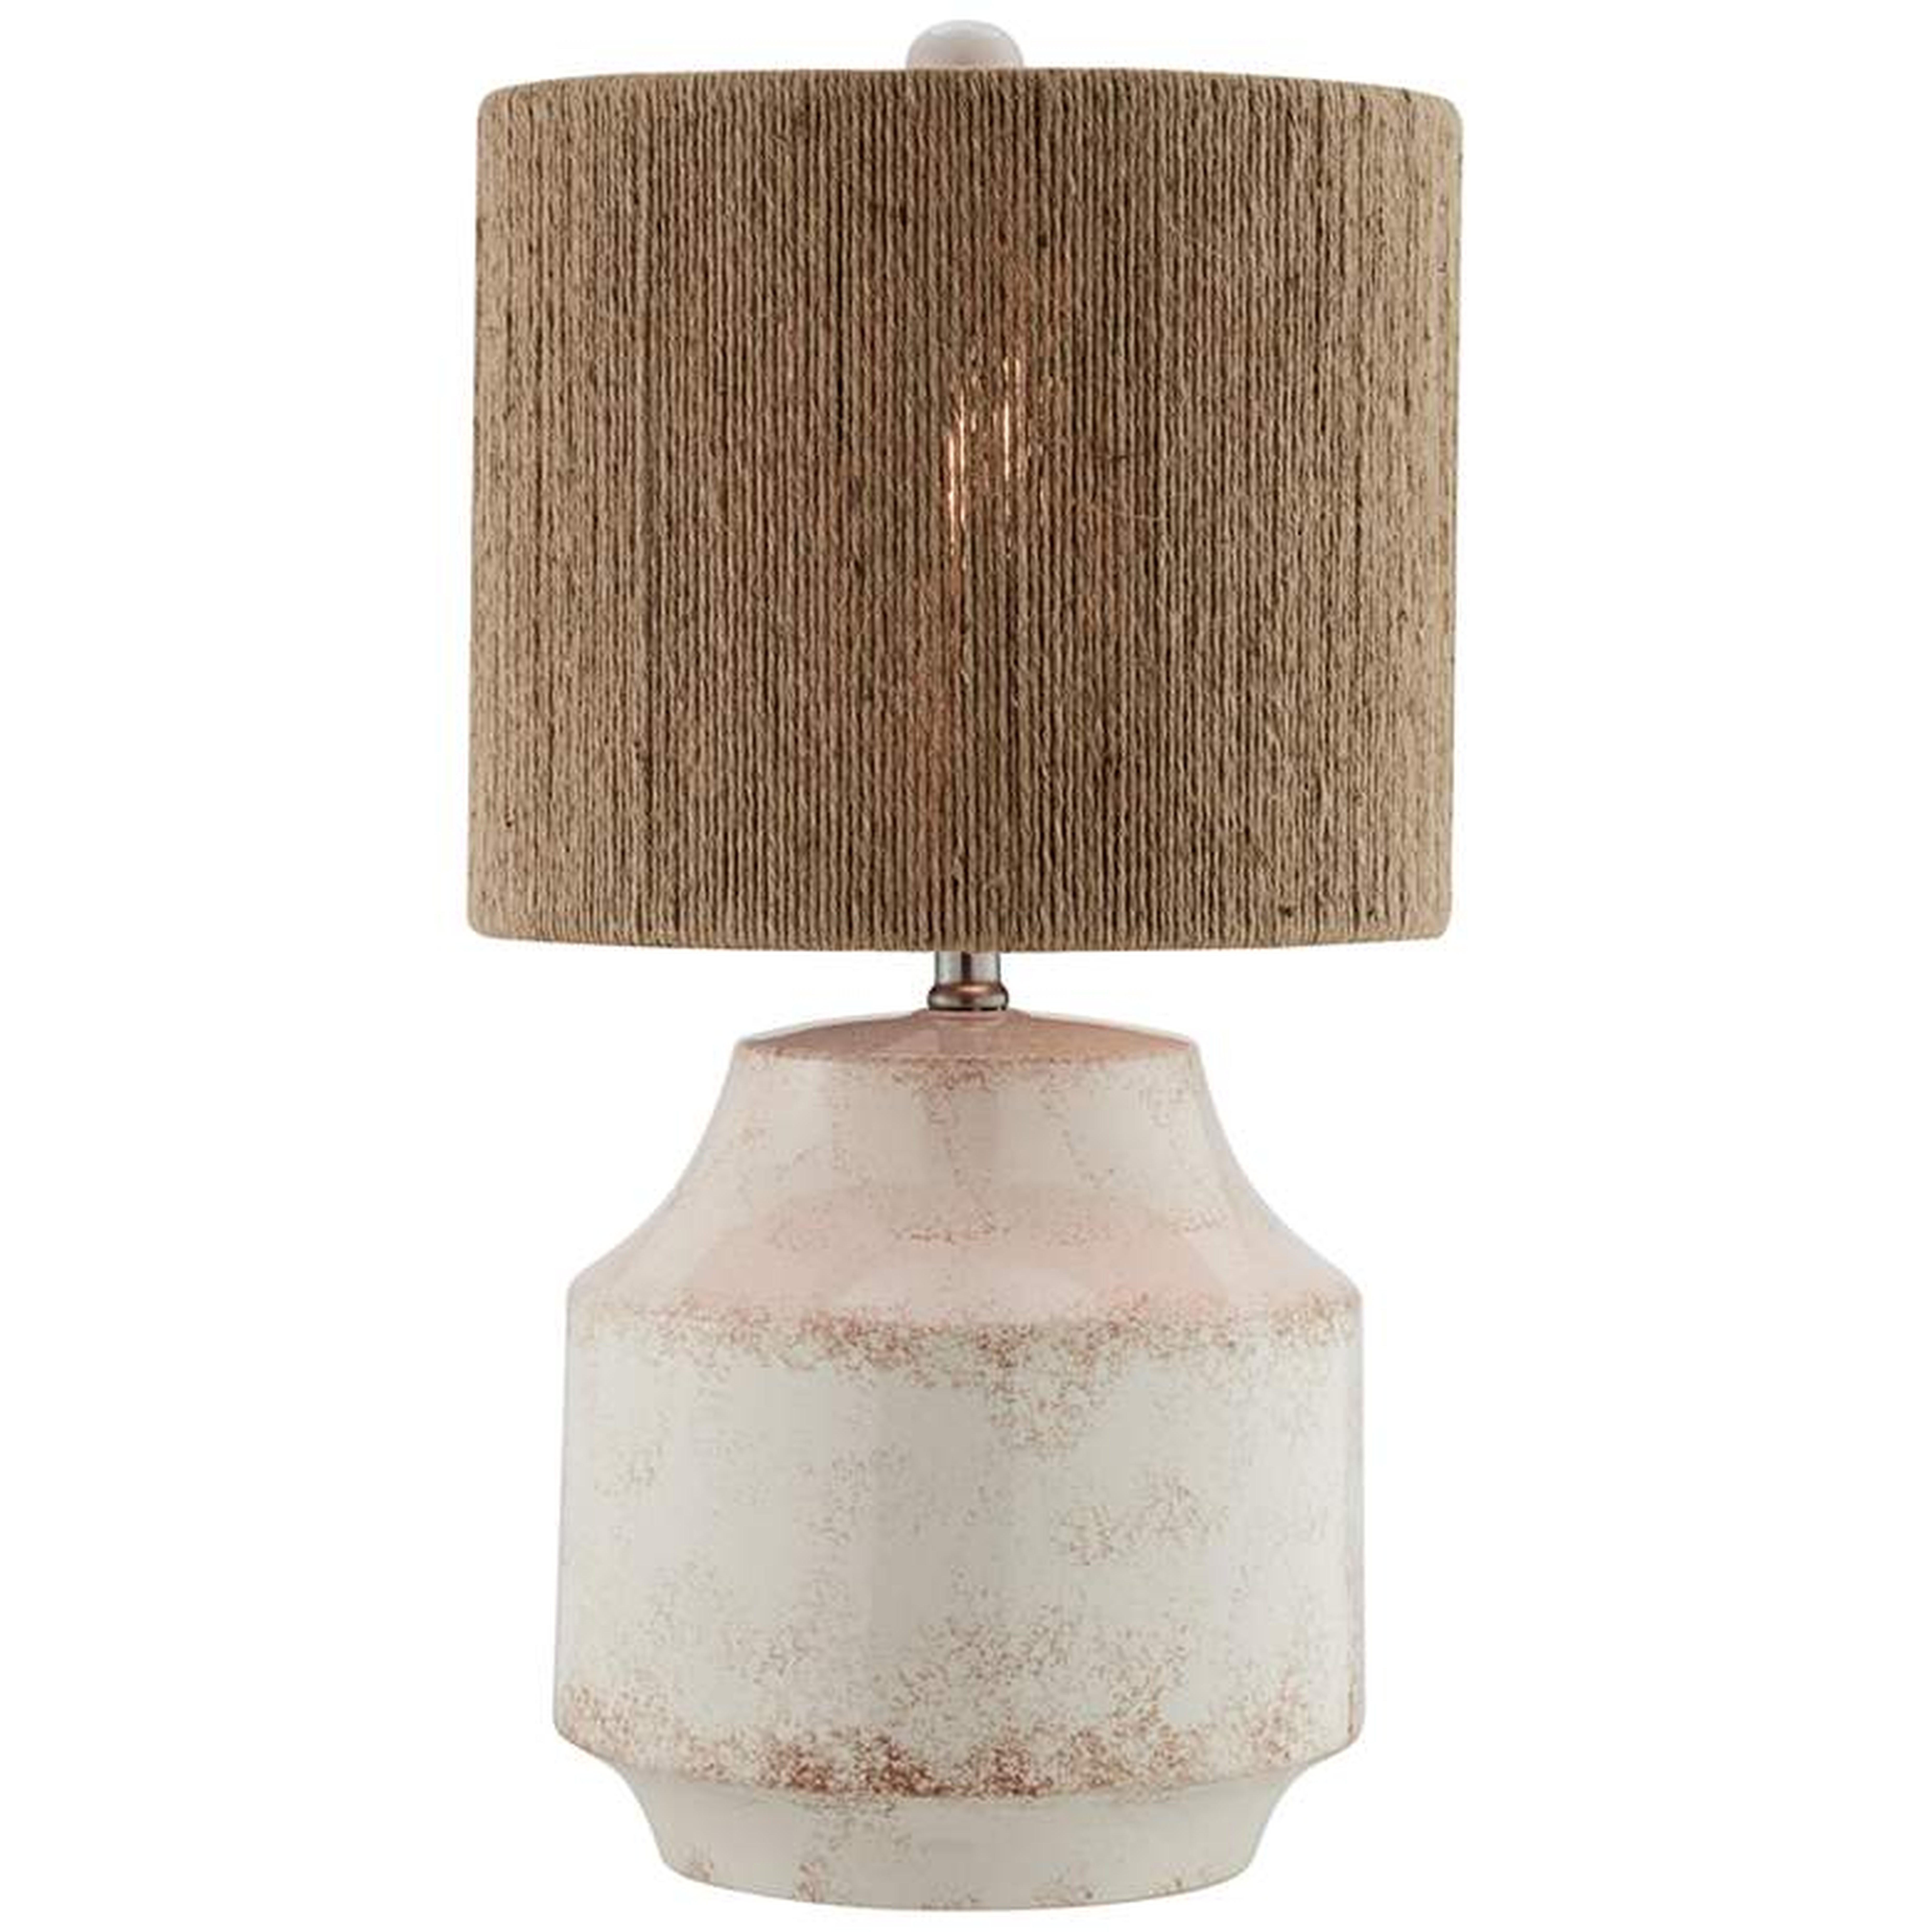 Lite Source Donnie Rusted White Ceramic Table Lamp - Lamps Plus